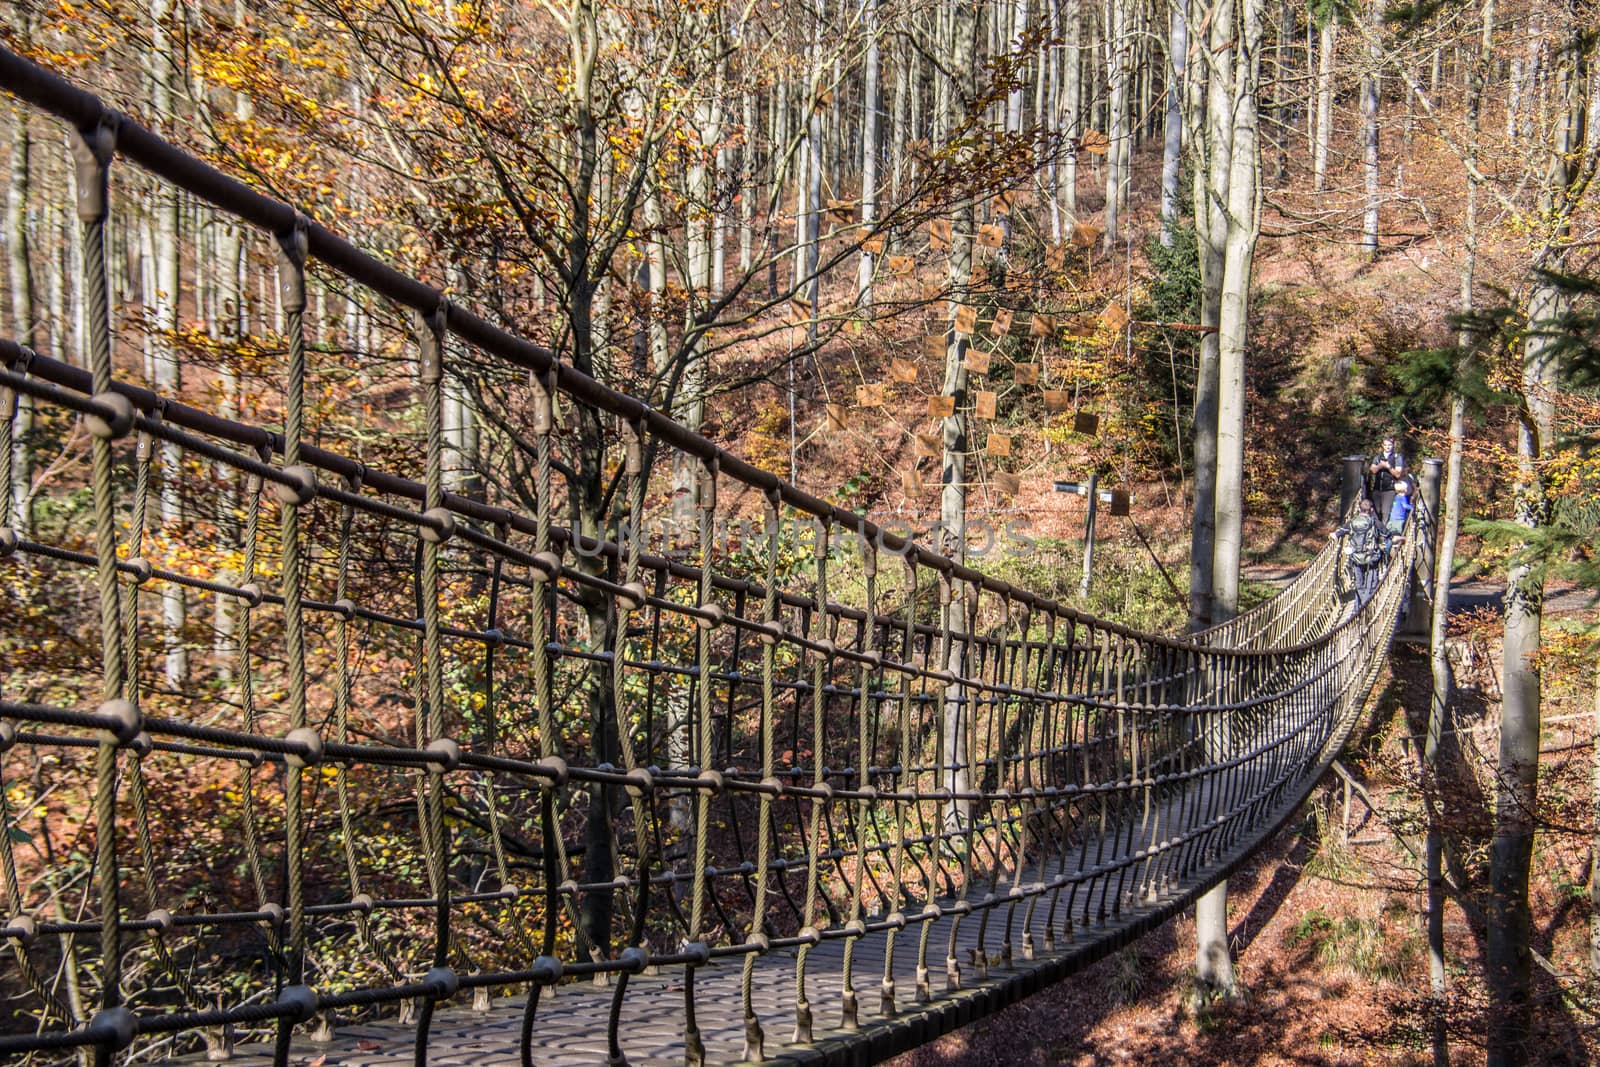 Suspension bridge as a tourist attraction in the Rothaar Mountains